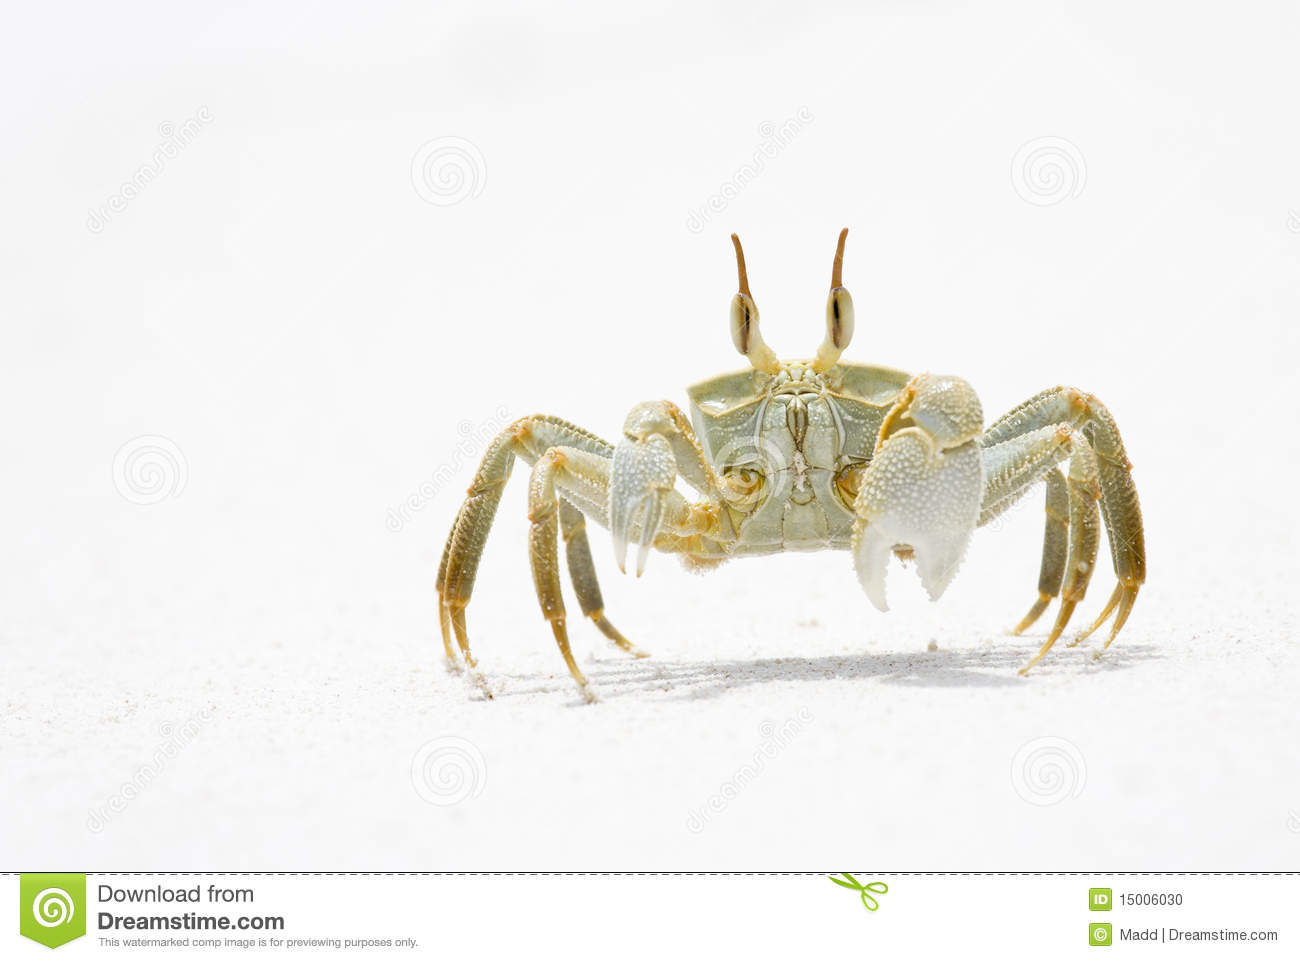 Ghost Crab clipart #18, Download drawings